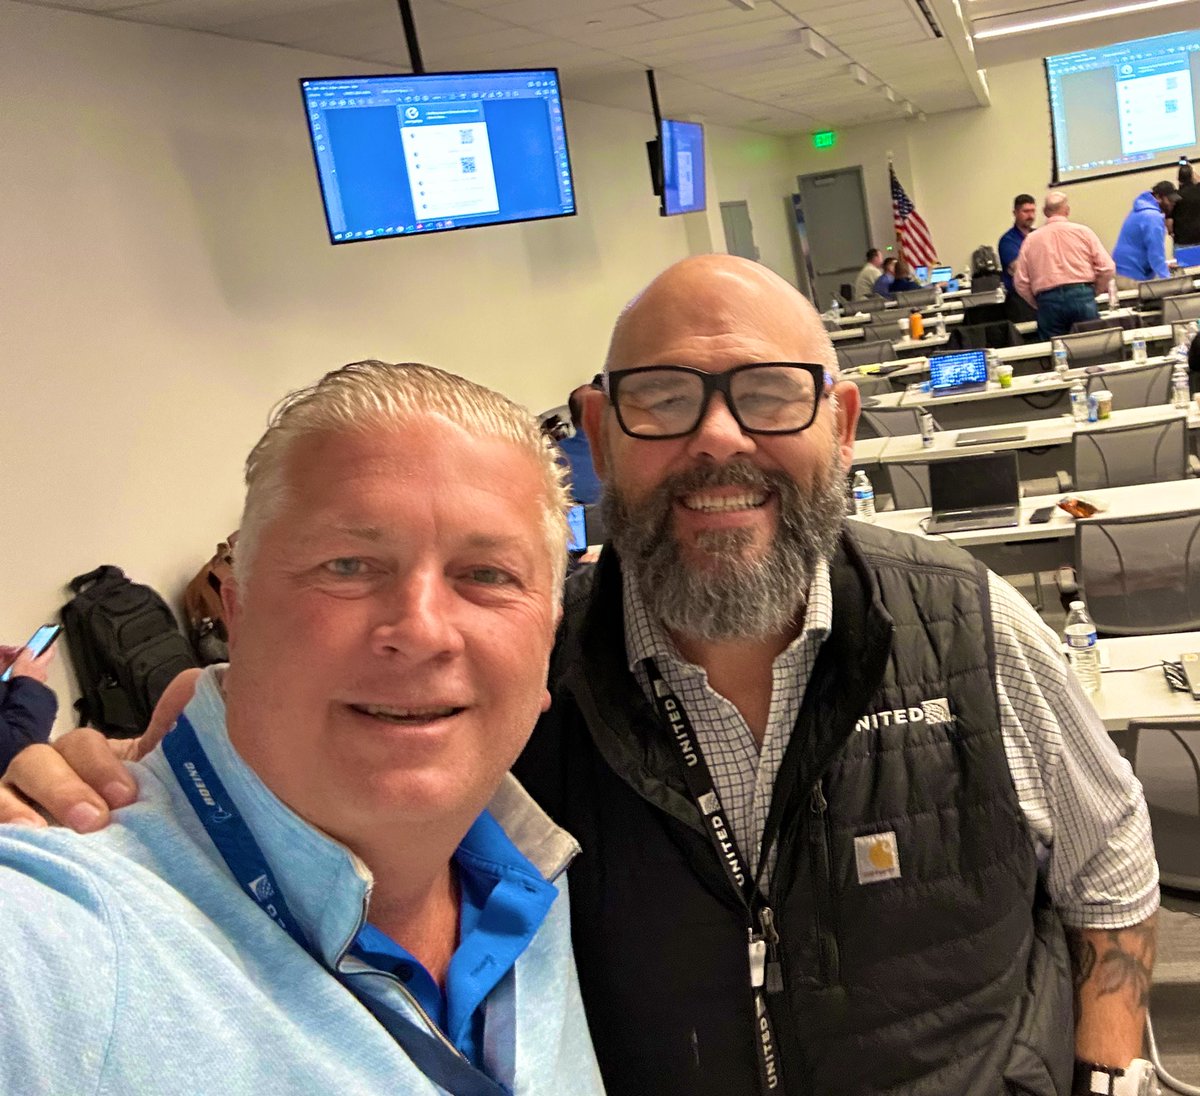 Nice catching up with my #United ✈️ Twitter Buddy @BigBritt44 while at our fantastic DEN Flight Training Center👍👍 #beingunited